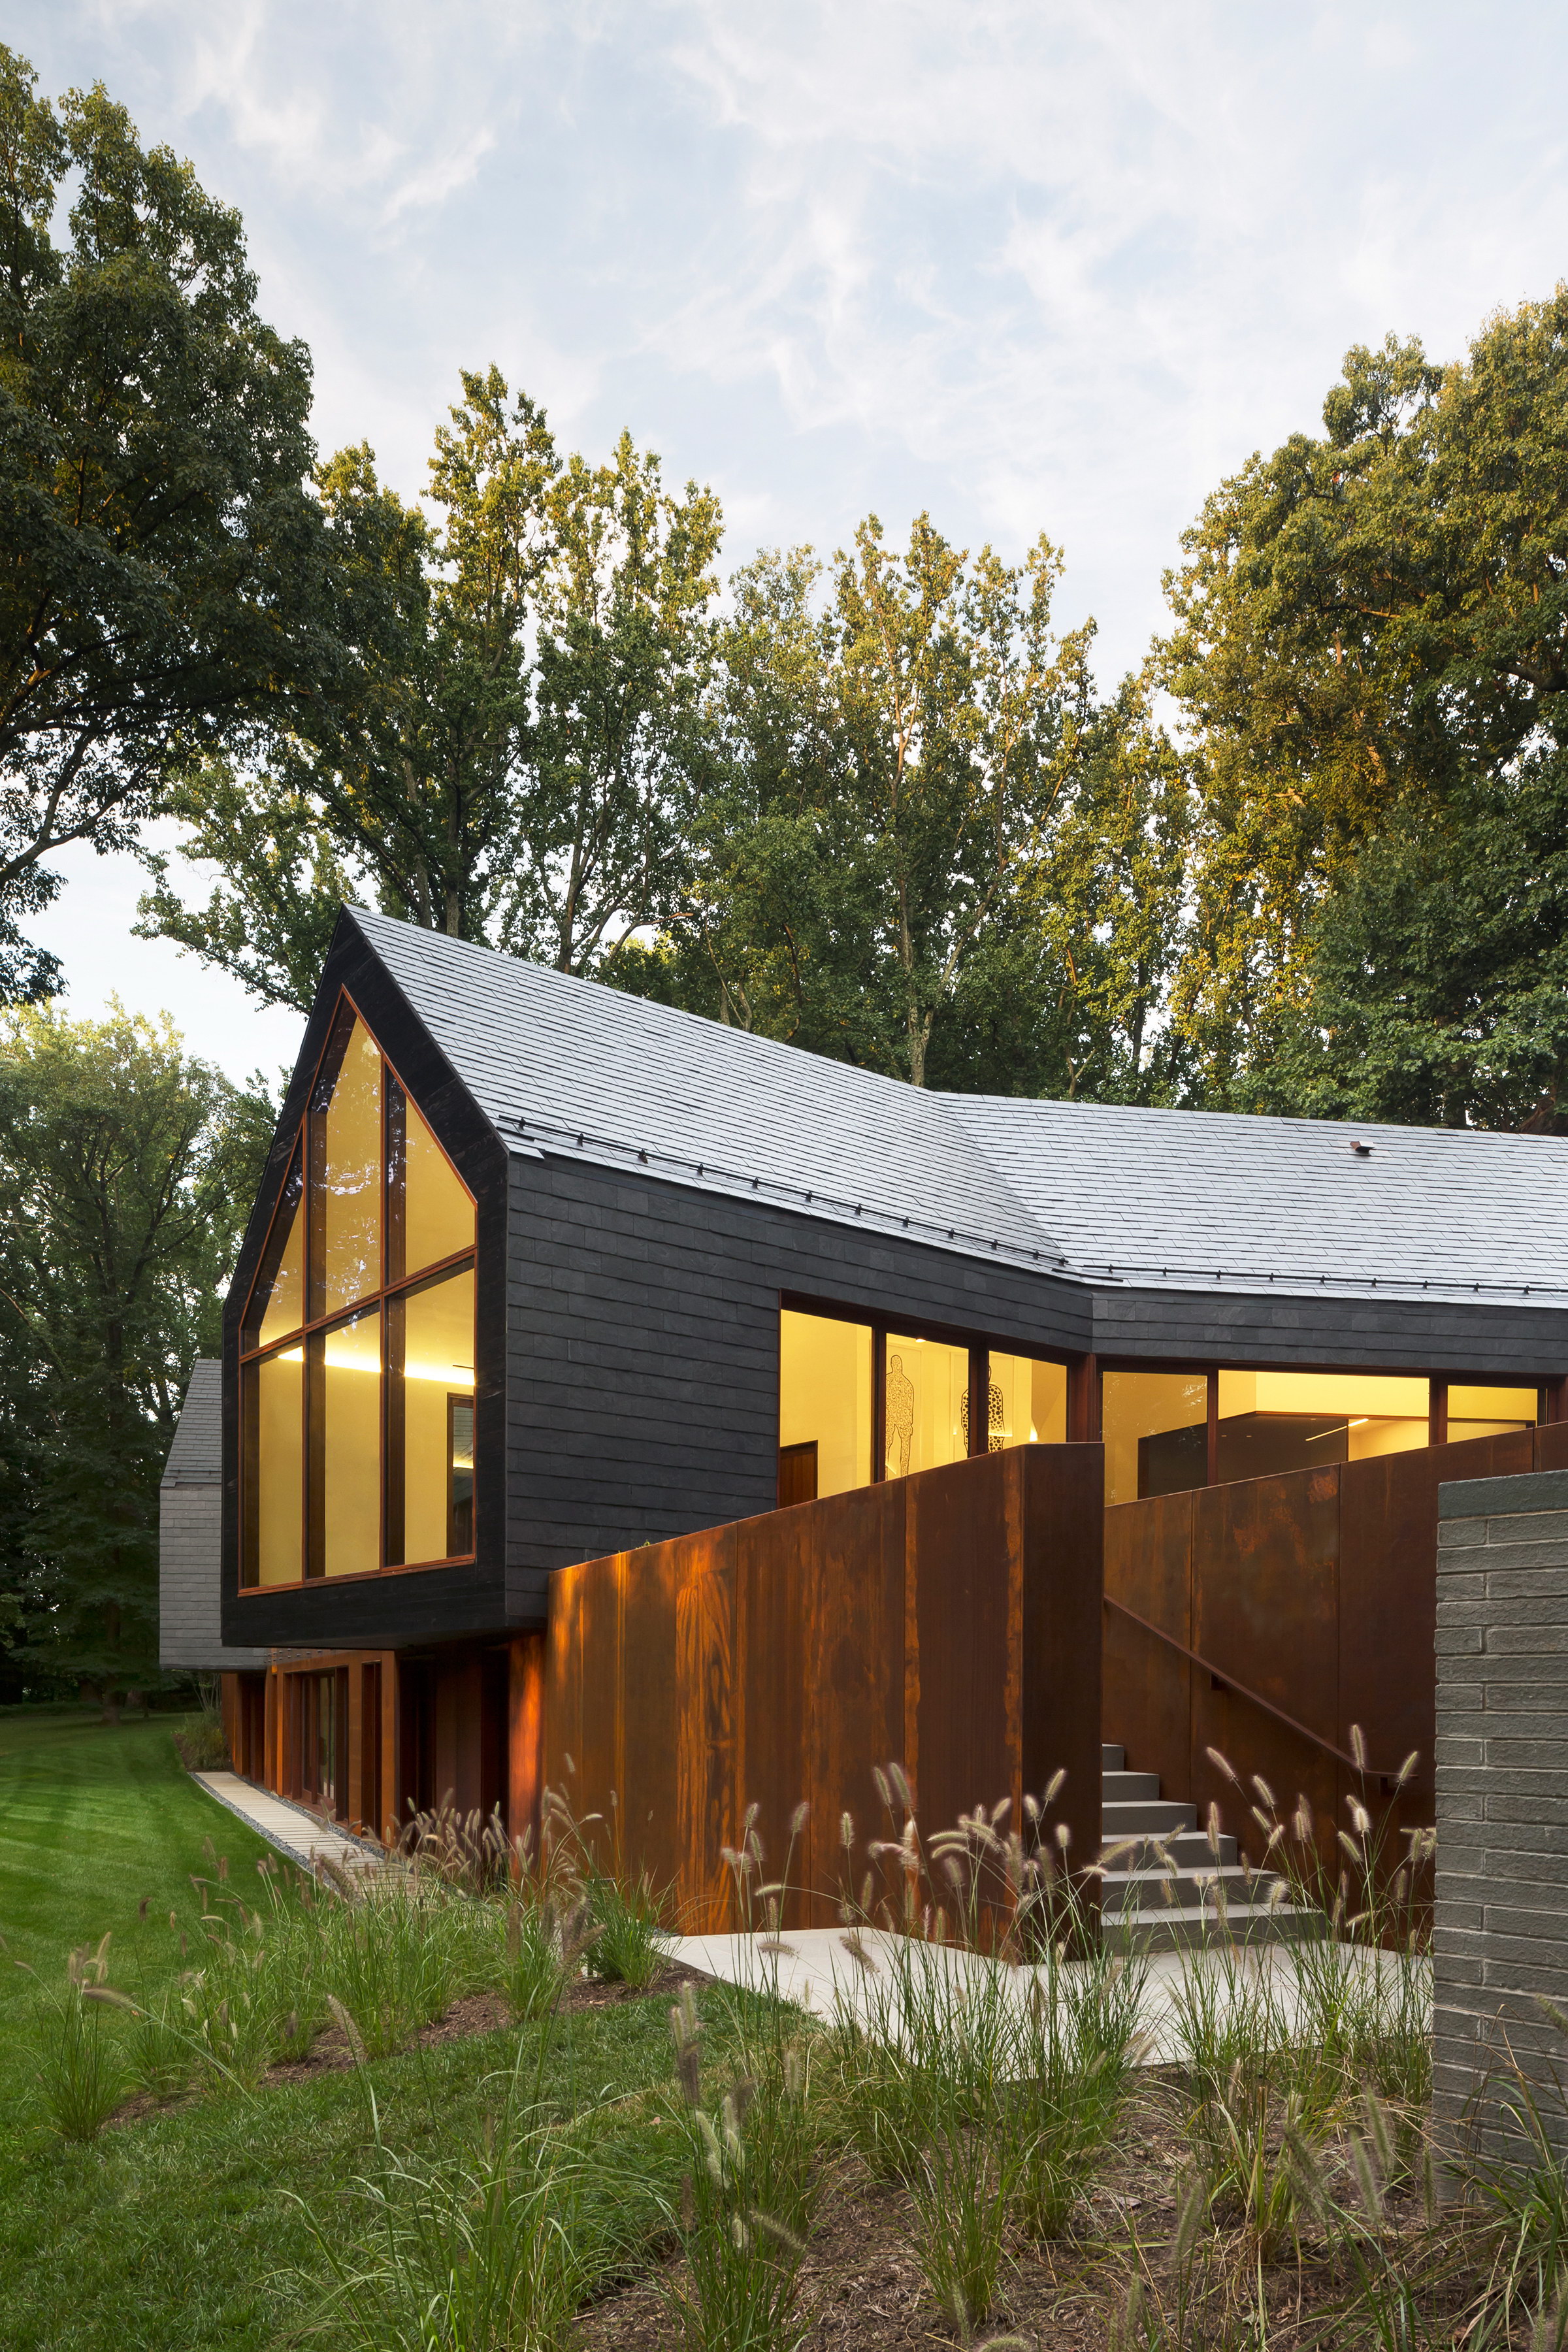 Slate House by Ziger Snead Architects